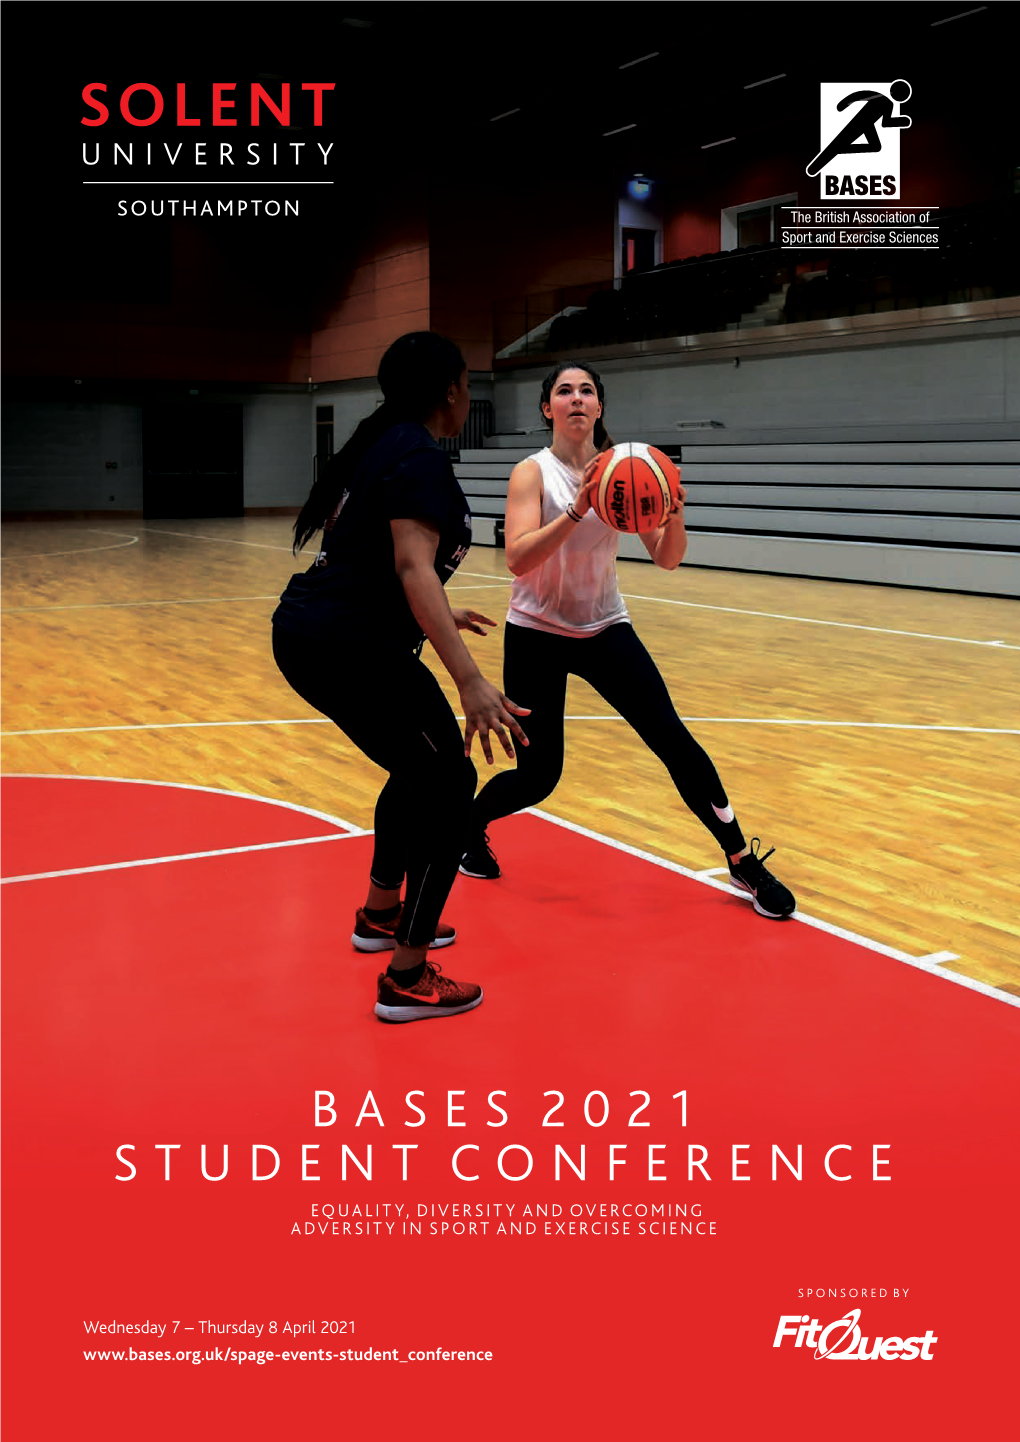 Bases 2021 Student Conference Equality, Diversity and Overcoming Adversity in Sport and Exercise Science